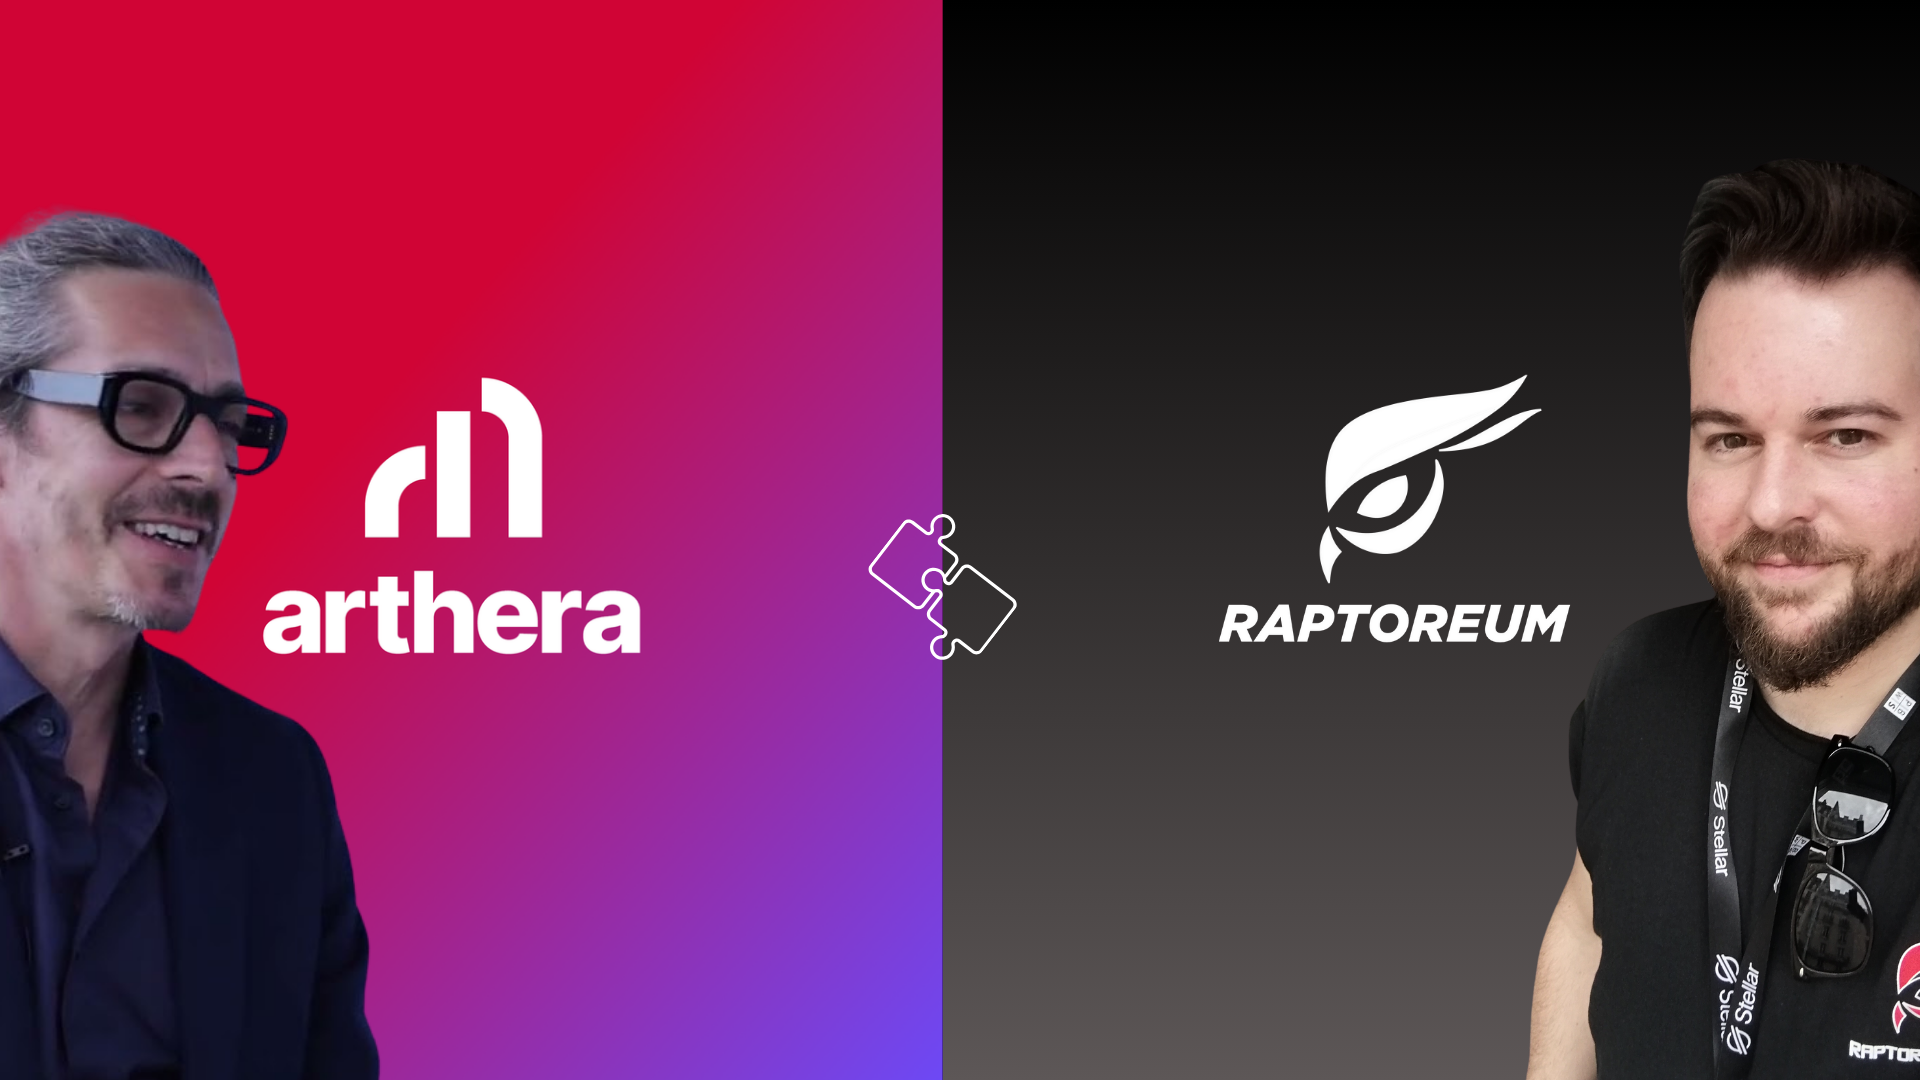 Laurent Perello, CEO at Arthera and Paul Mills at Raptoreum Core join forces 